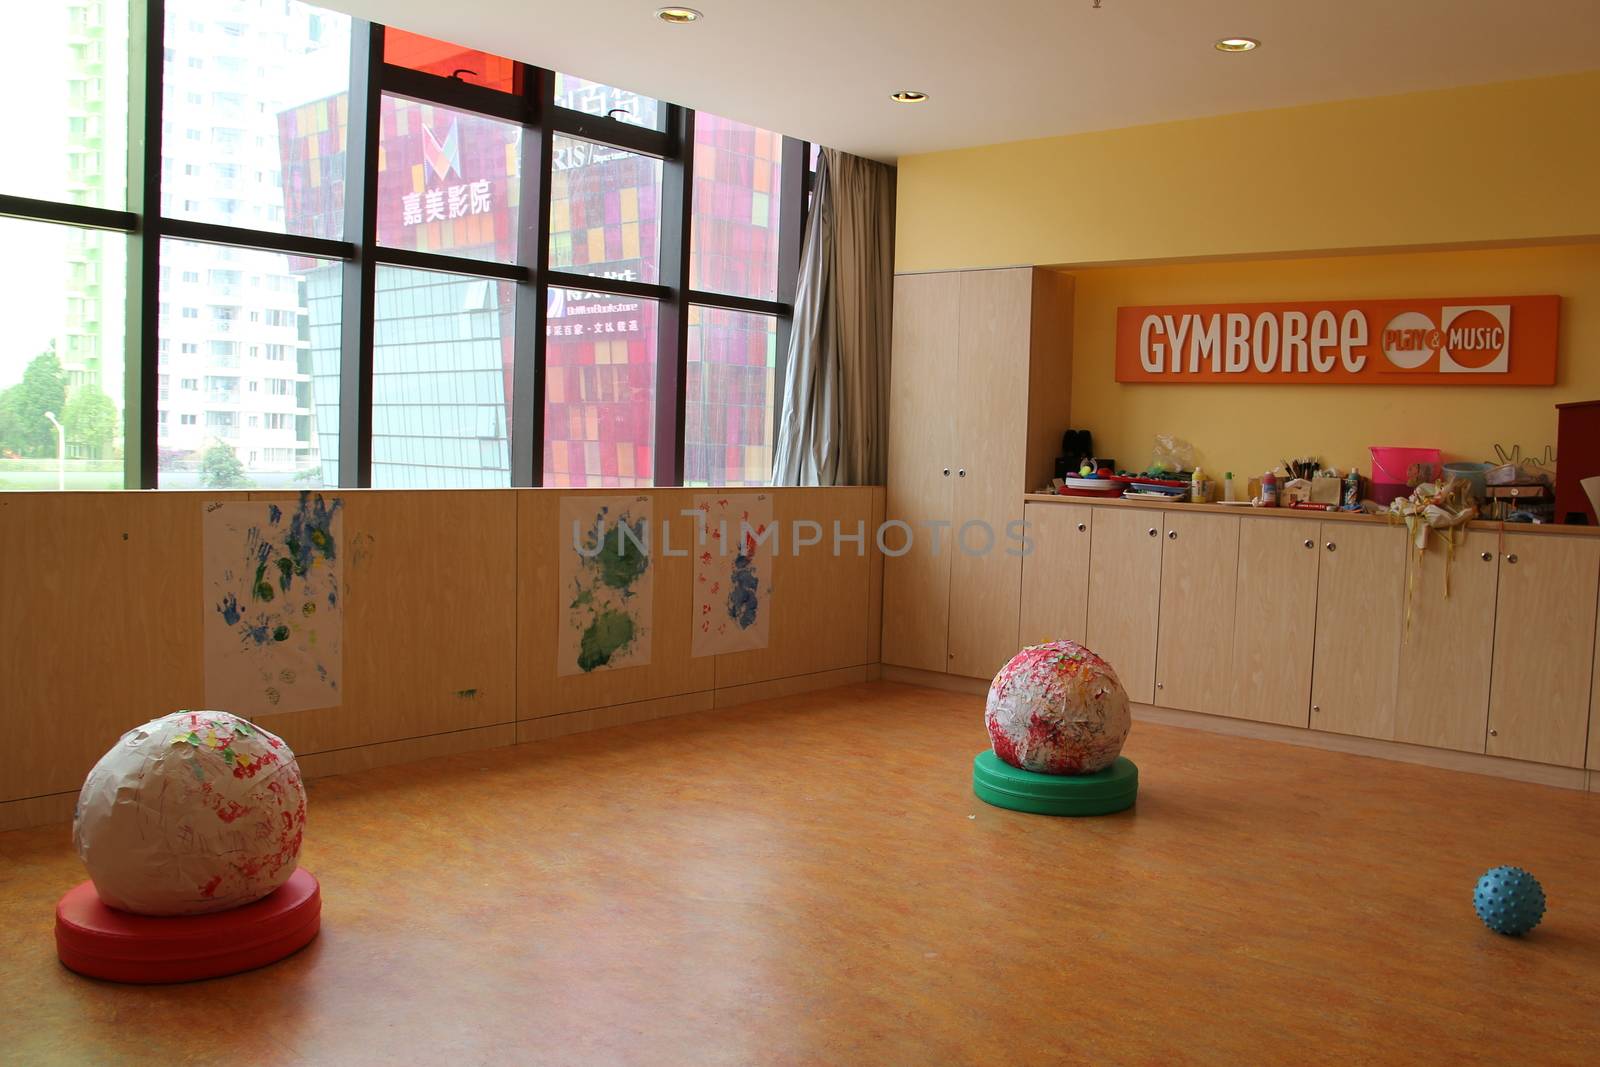 Gymboree in China by AlisonLee